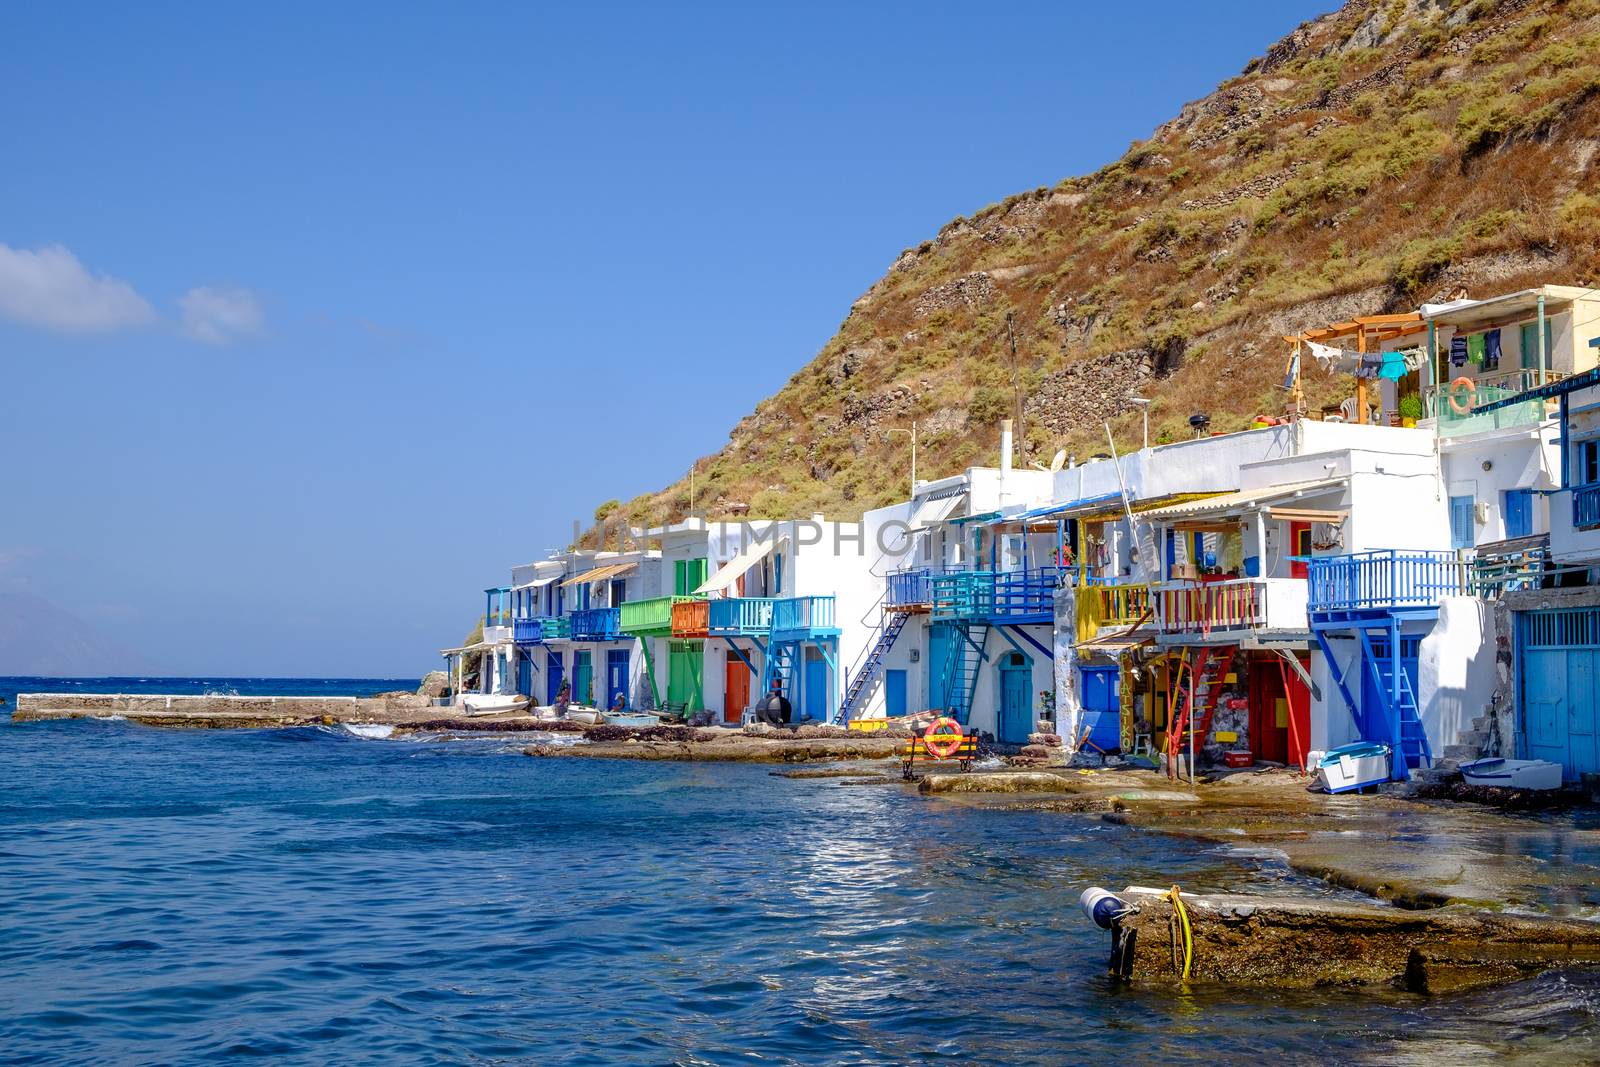 Klima, Greece - 27 August 2015: Scenic view of traditional fisherman village by martinm303